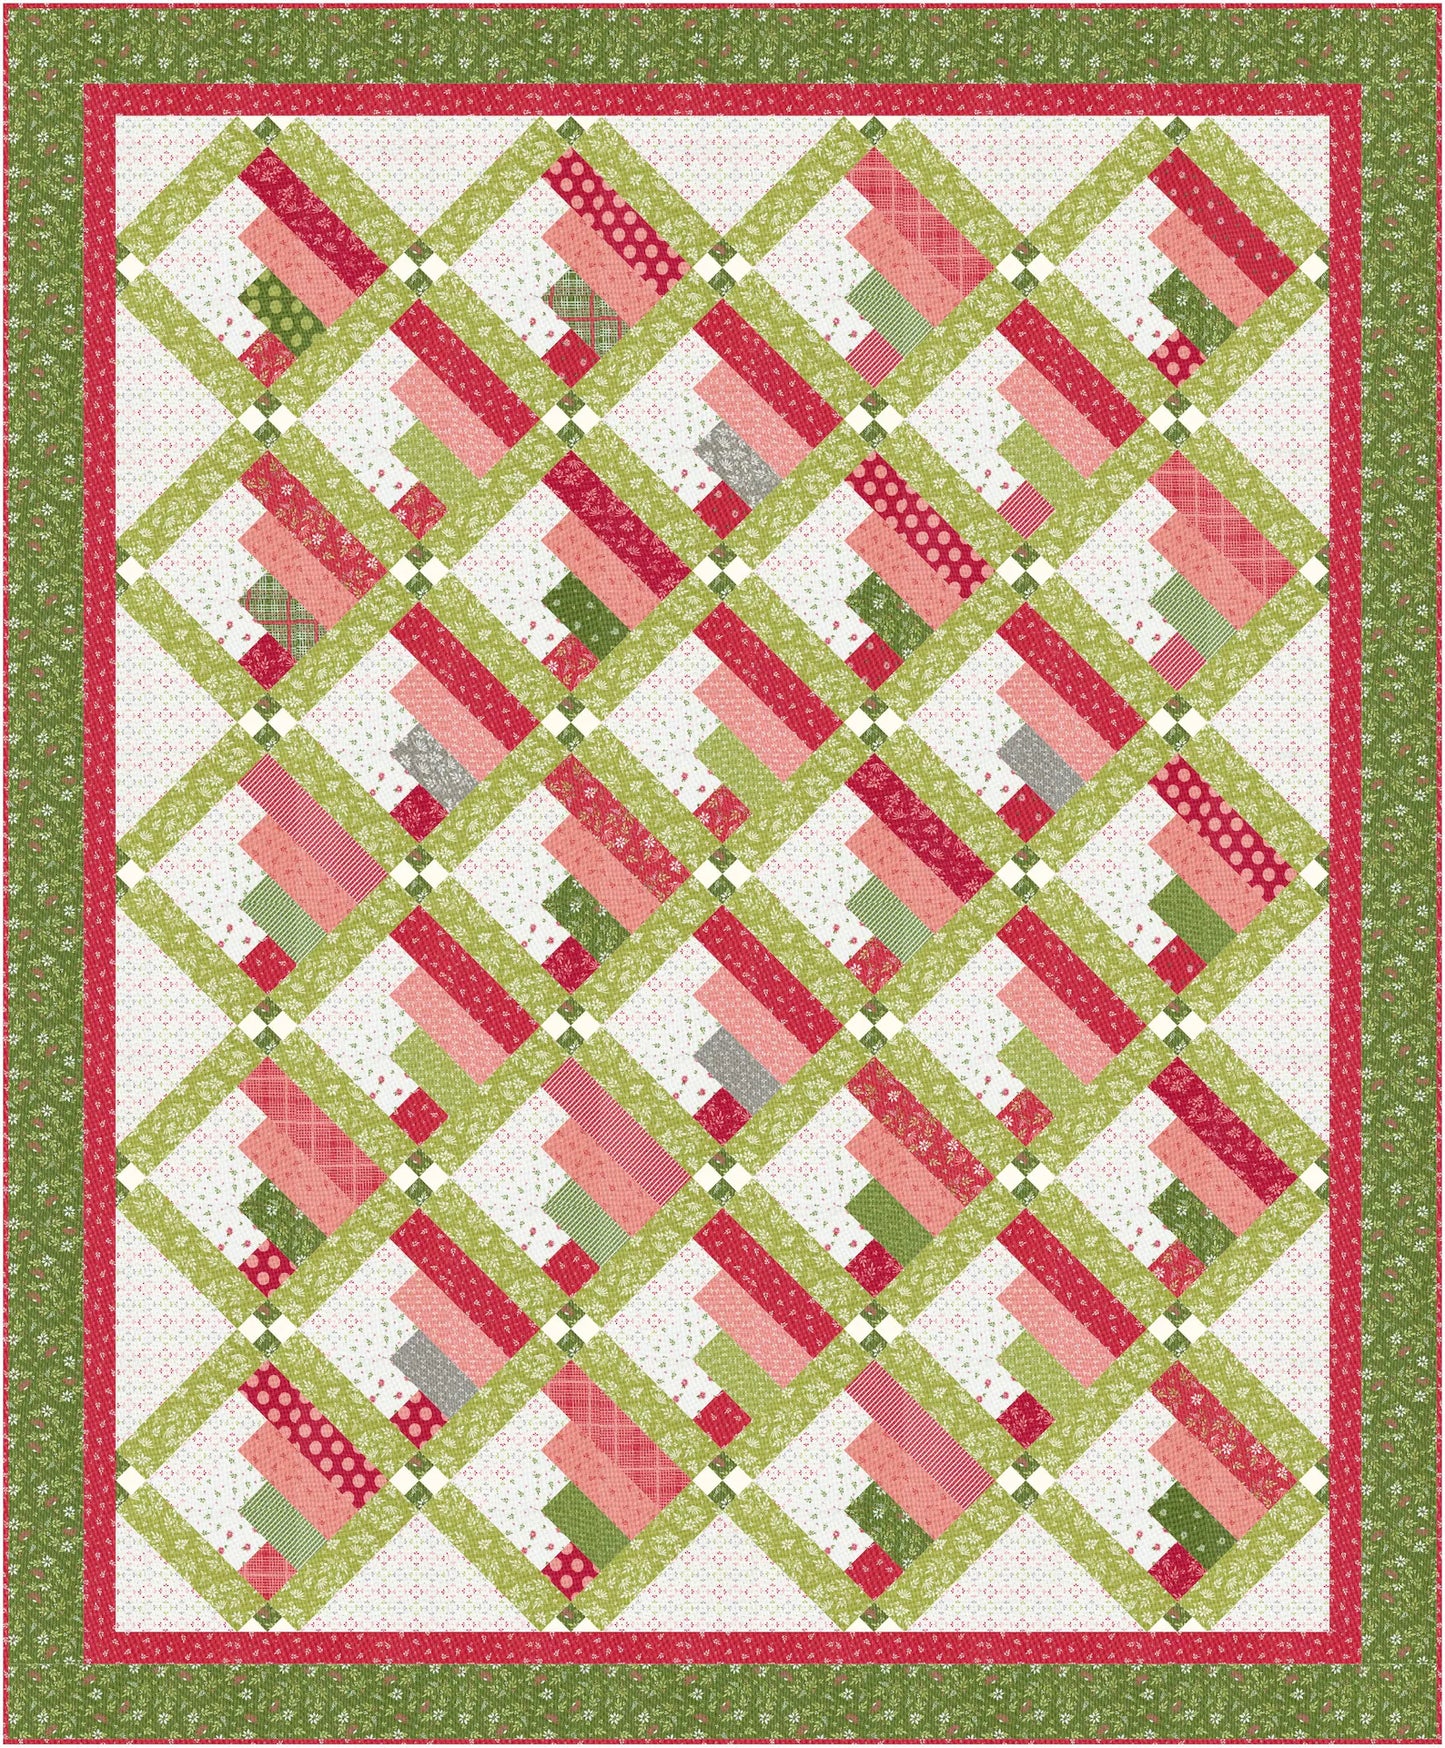 Seasons Greetings Quilt Pattern by A Quilting Life